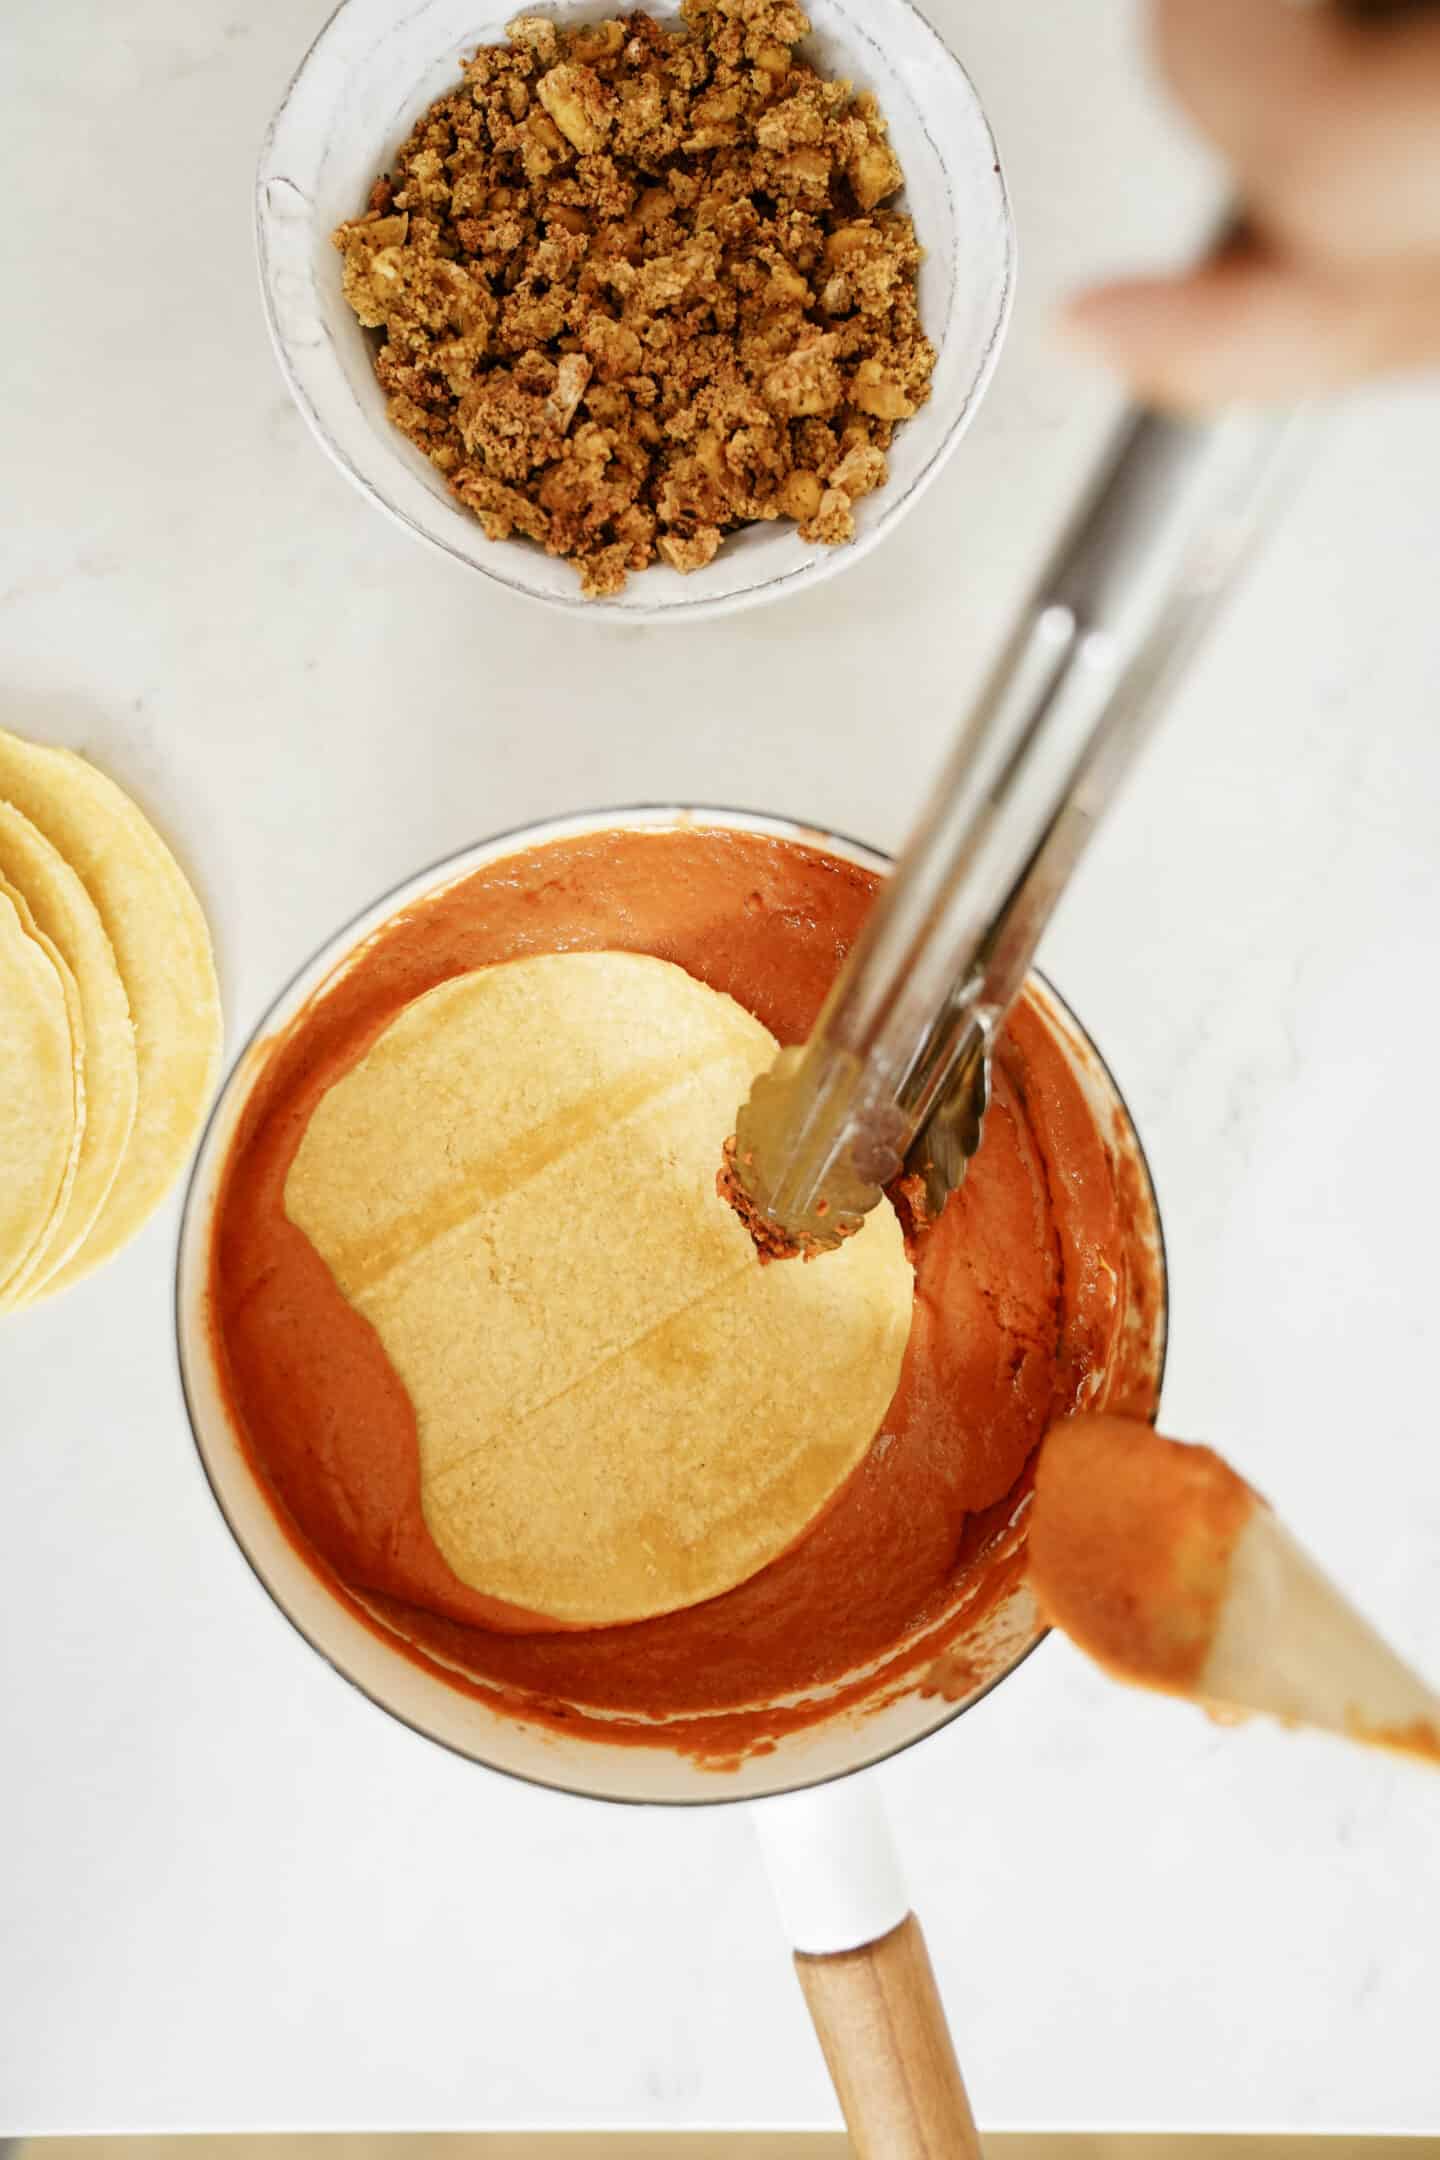 Covering tortillas in sauce